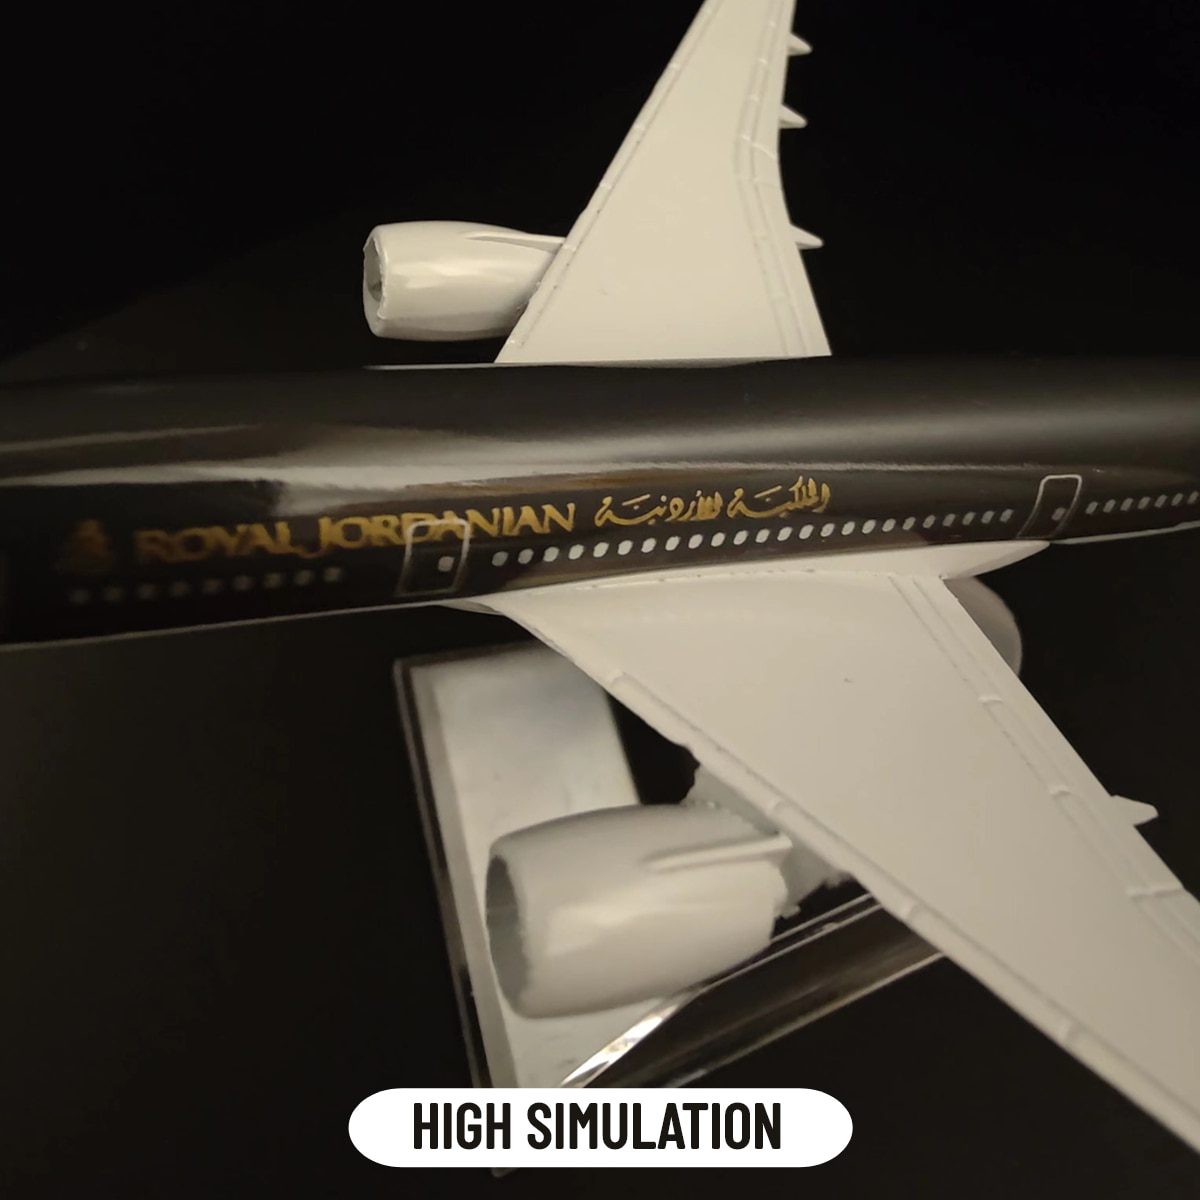 Scale-1-400-Metal-Airplane-Replica-15cm-Jordanian-Africa-Airlines-Aircraft-Model-Aviation-Diecast-Collectible-Miniature-4